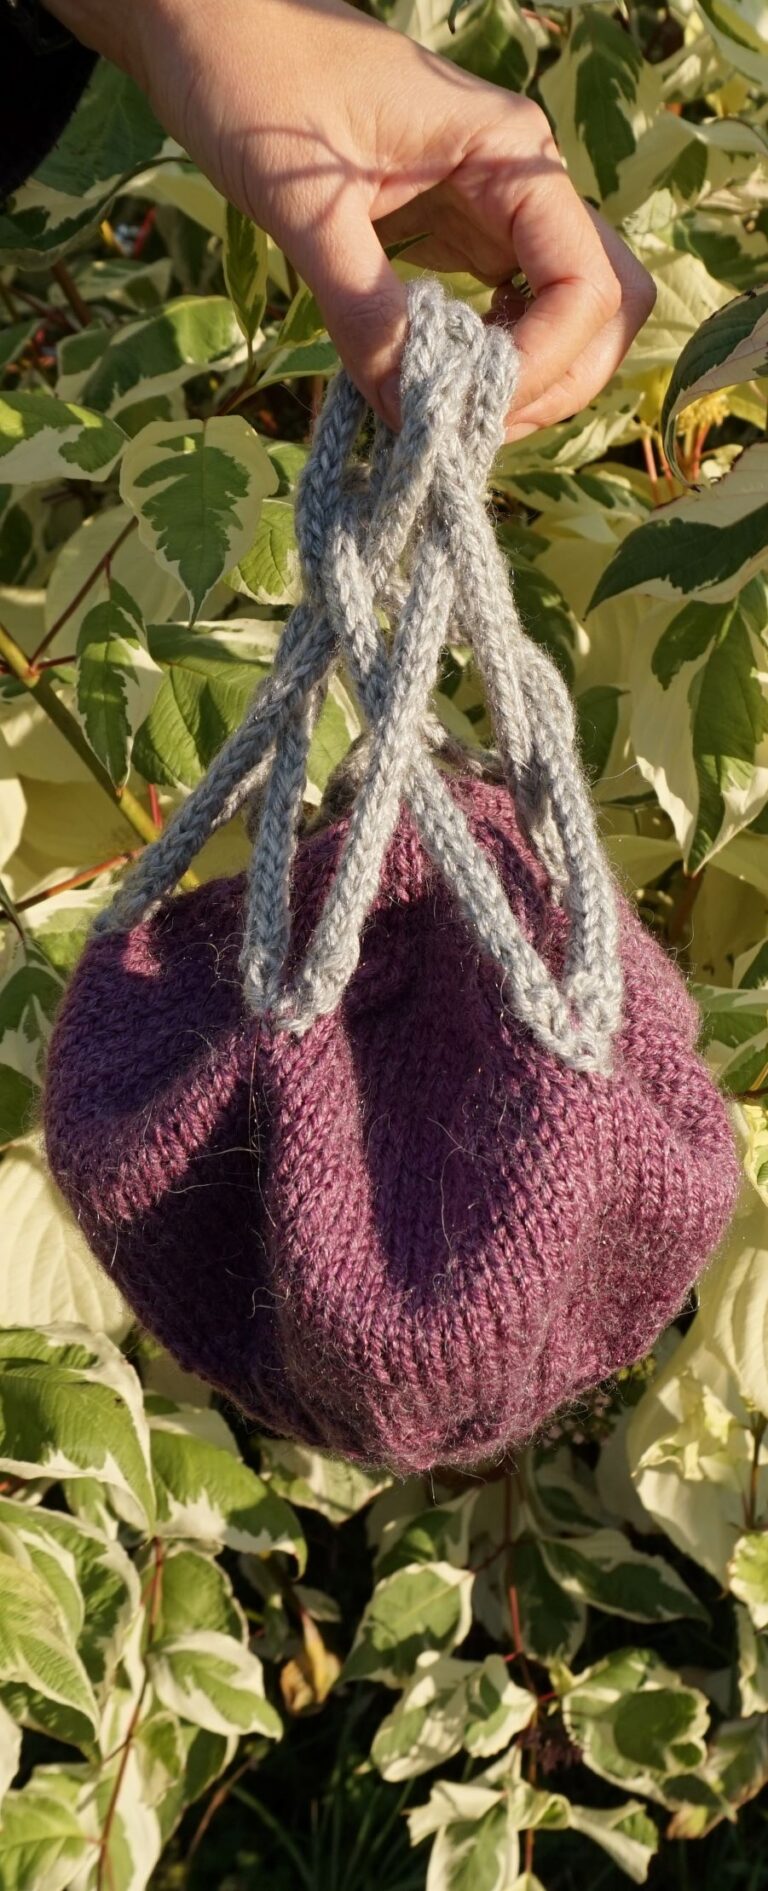 A hand is dangling a grey and purple hat by i-cord strands in front of leaves. -cood strands that form a celtic knot. In